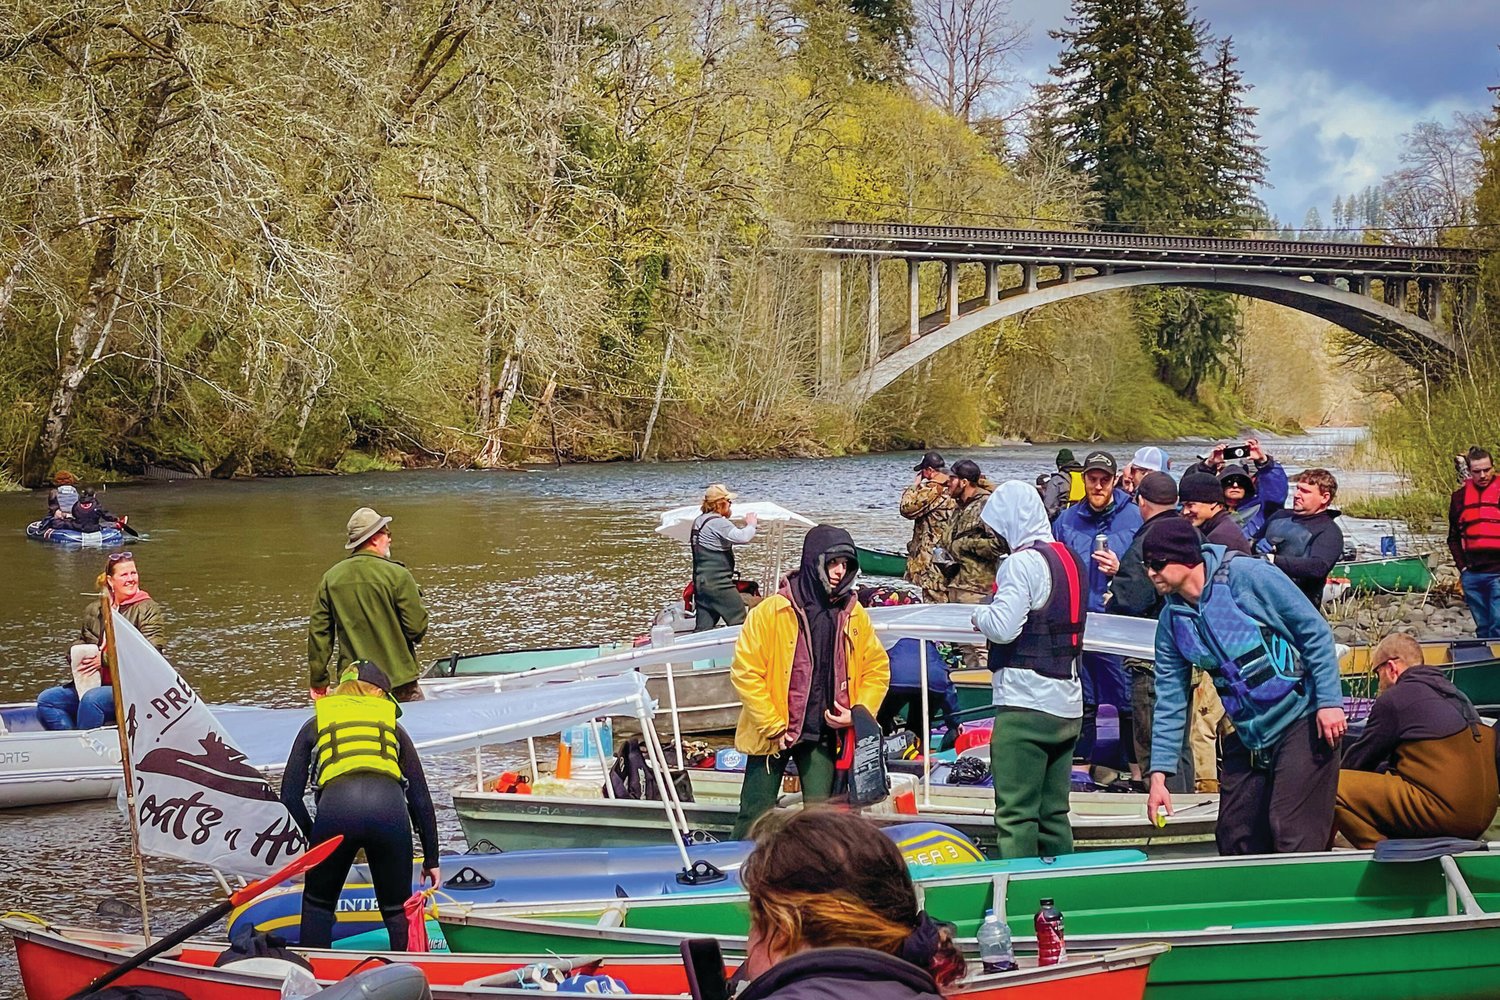 River runners prepare to launch onto the Chehalis at noon on Saturday.